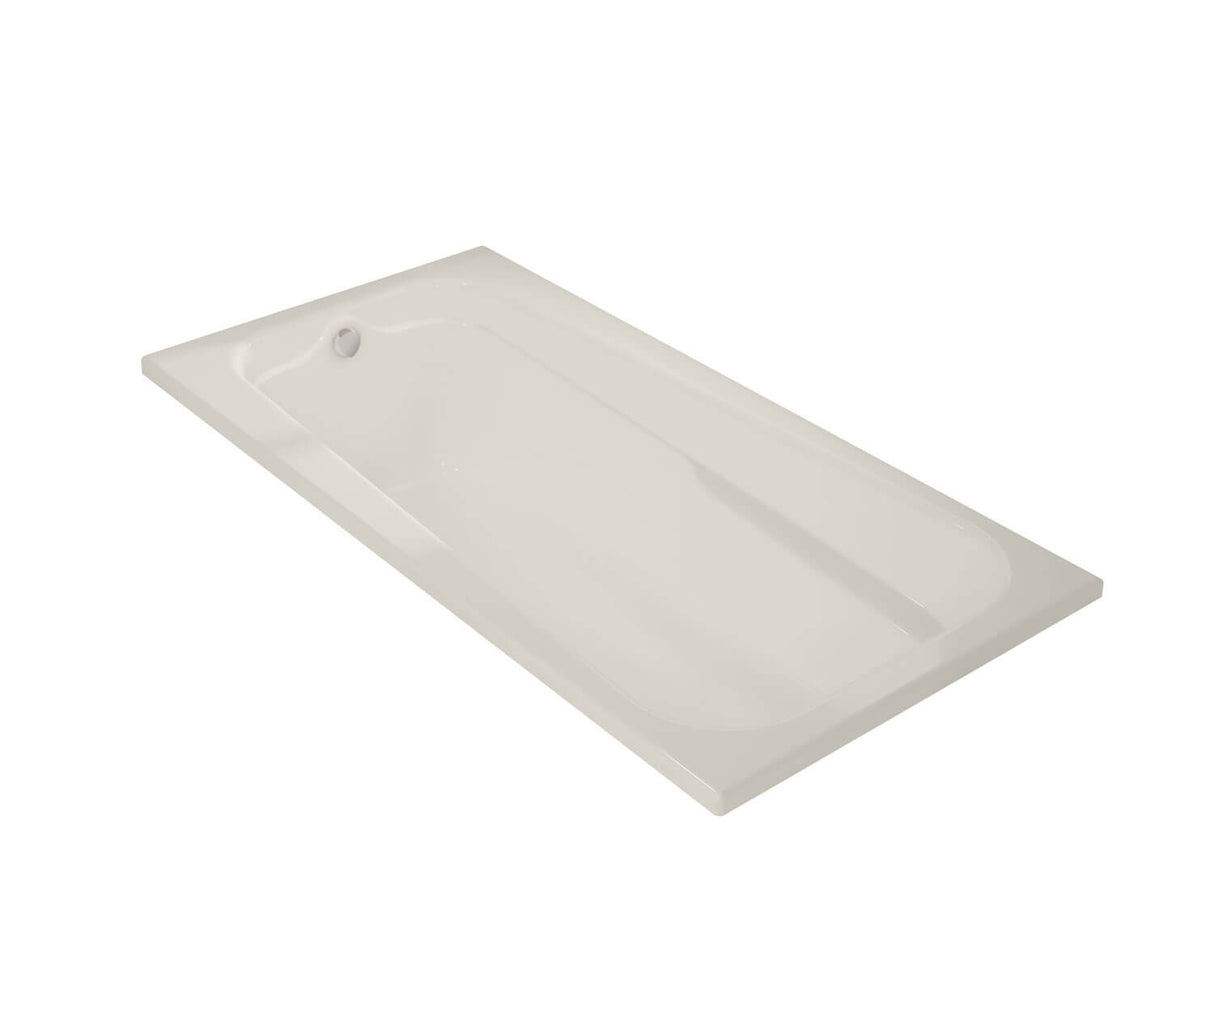 MAAX 100104-103-007 Timeless 72 x 36 Acrylic Alcove End Drain Aeroeffect Bathtub in Biscuit